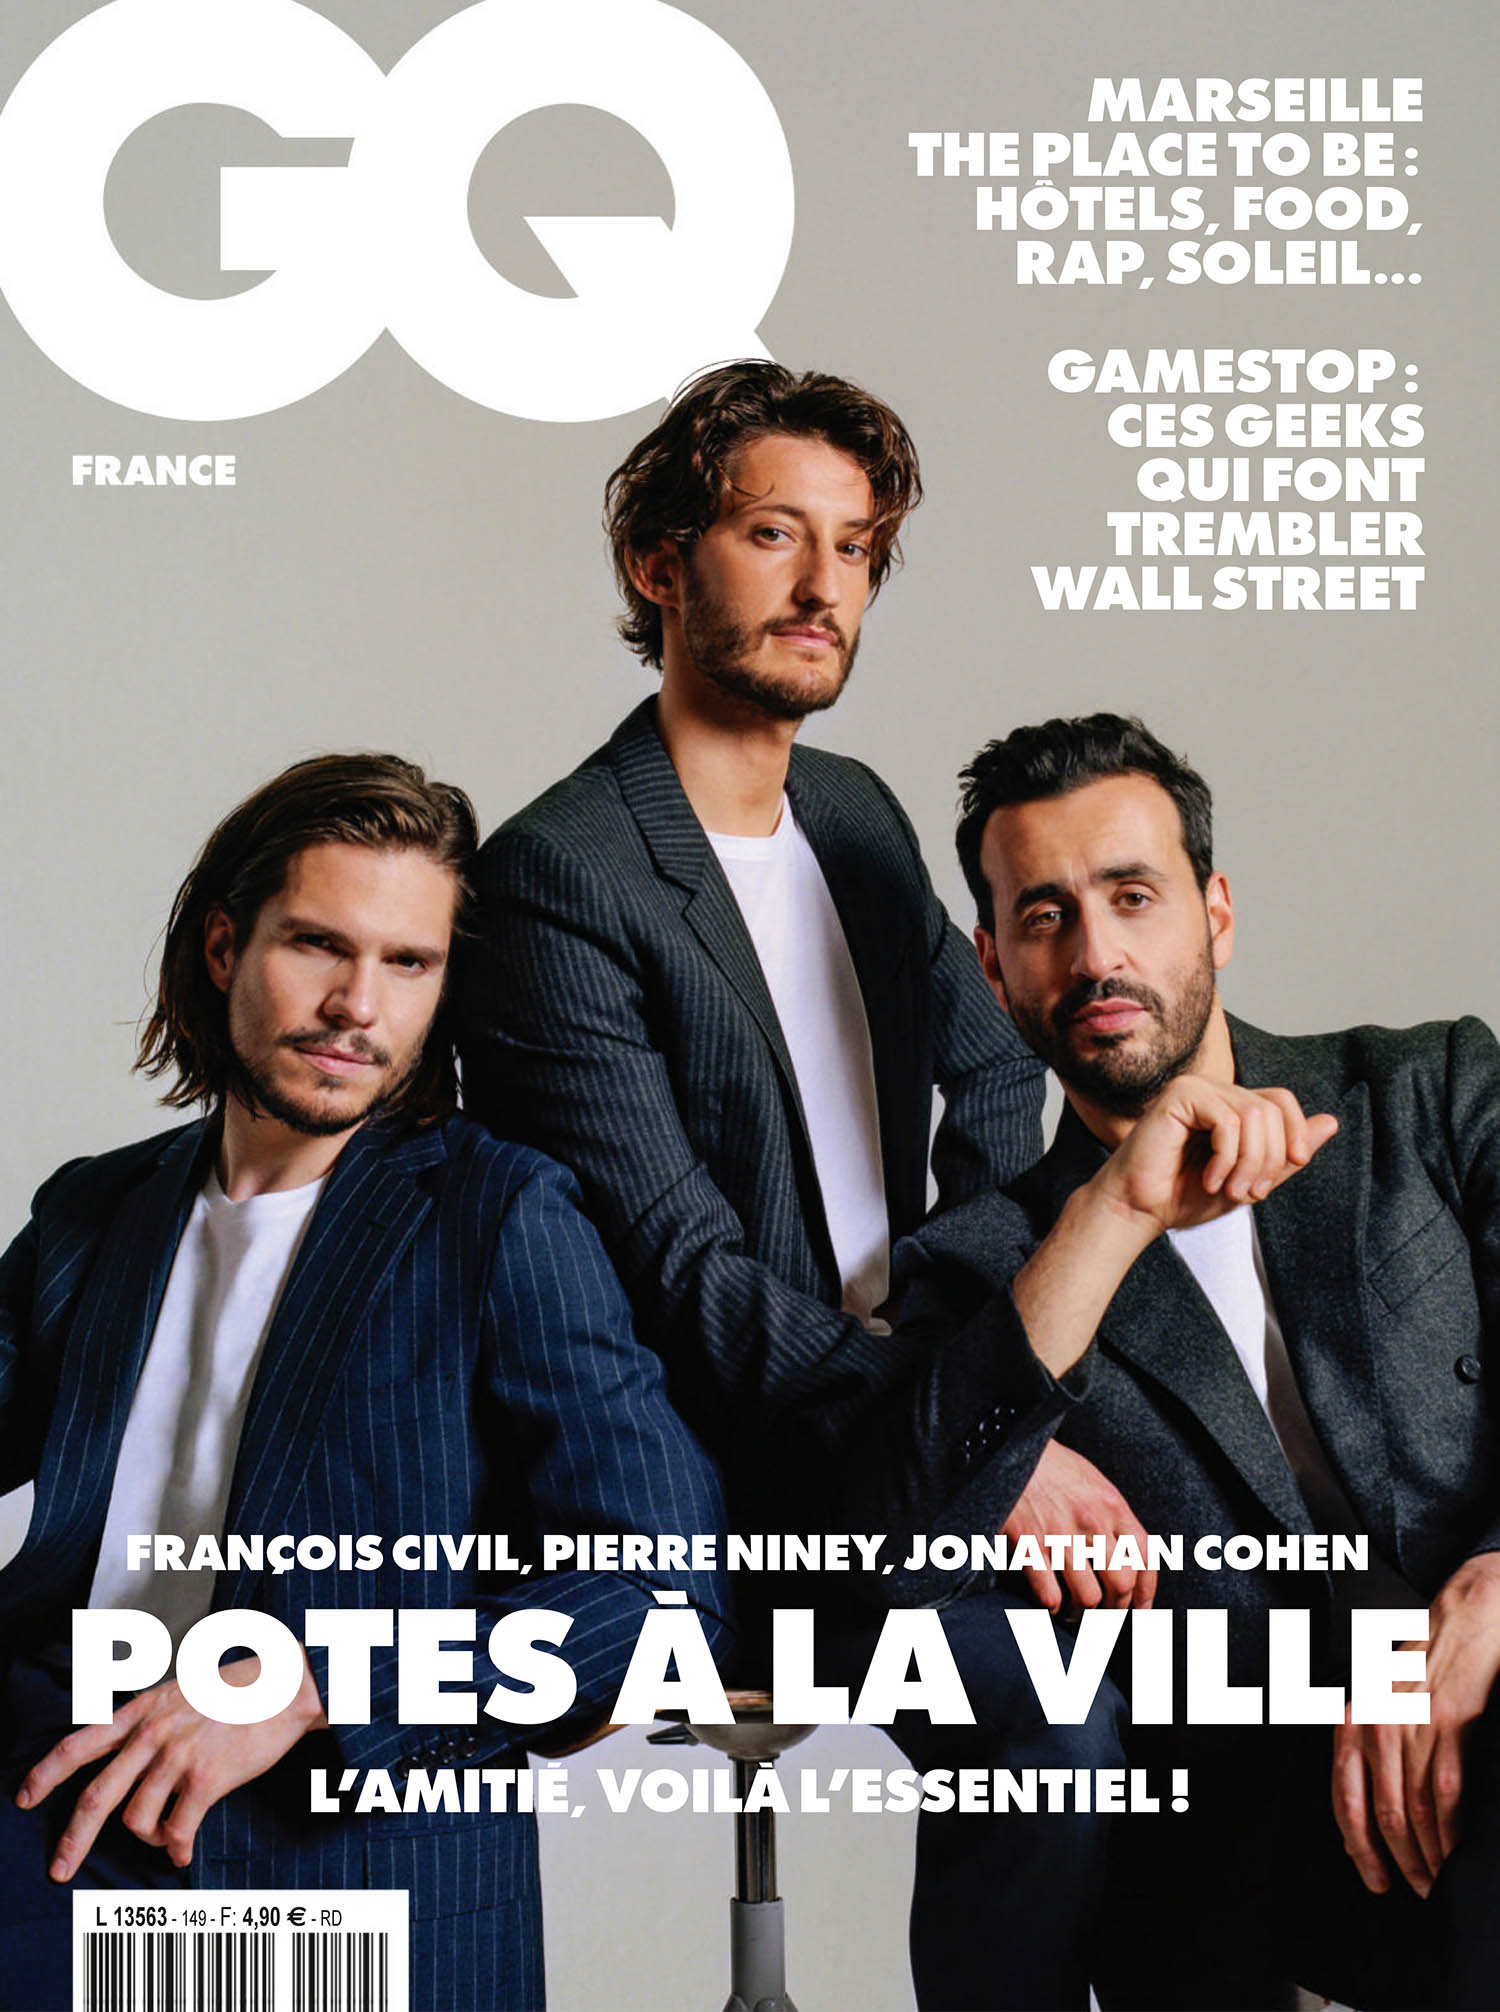 François Civil, Pierre Niney and Jonathan Cohen cover GQ France May 2021 by Marie Deteneuille